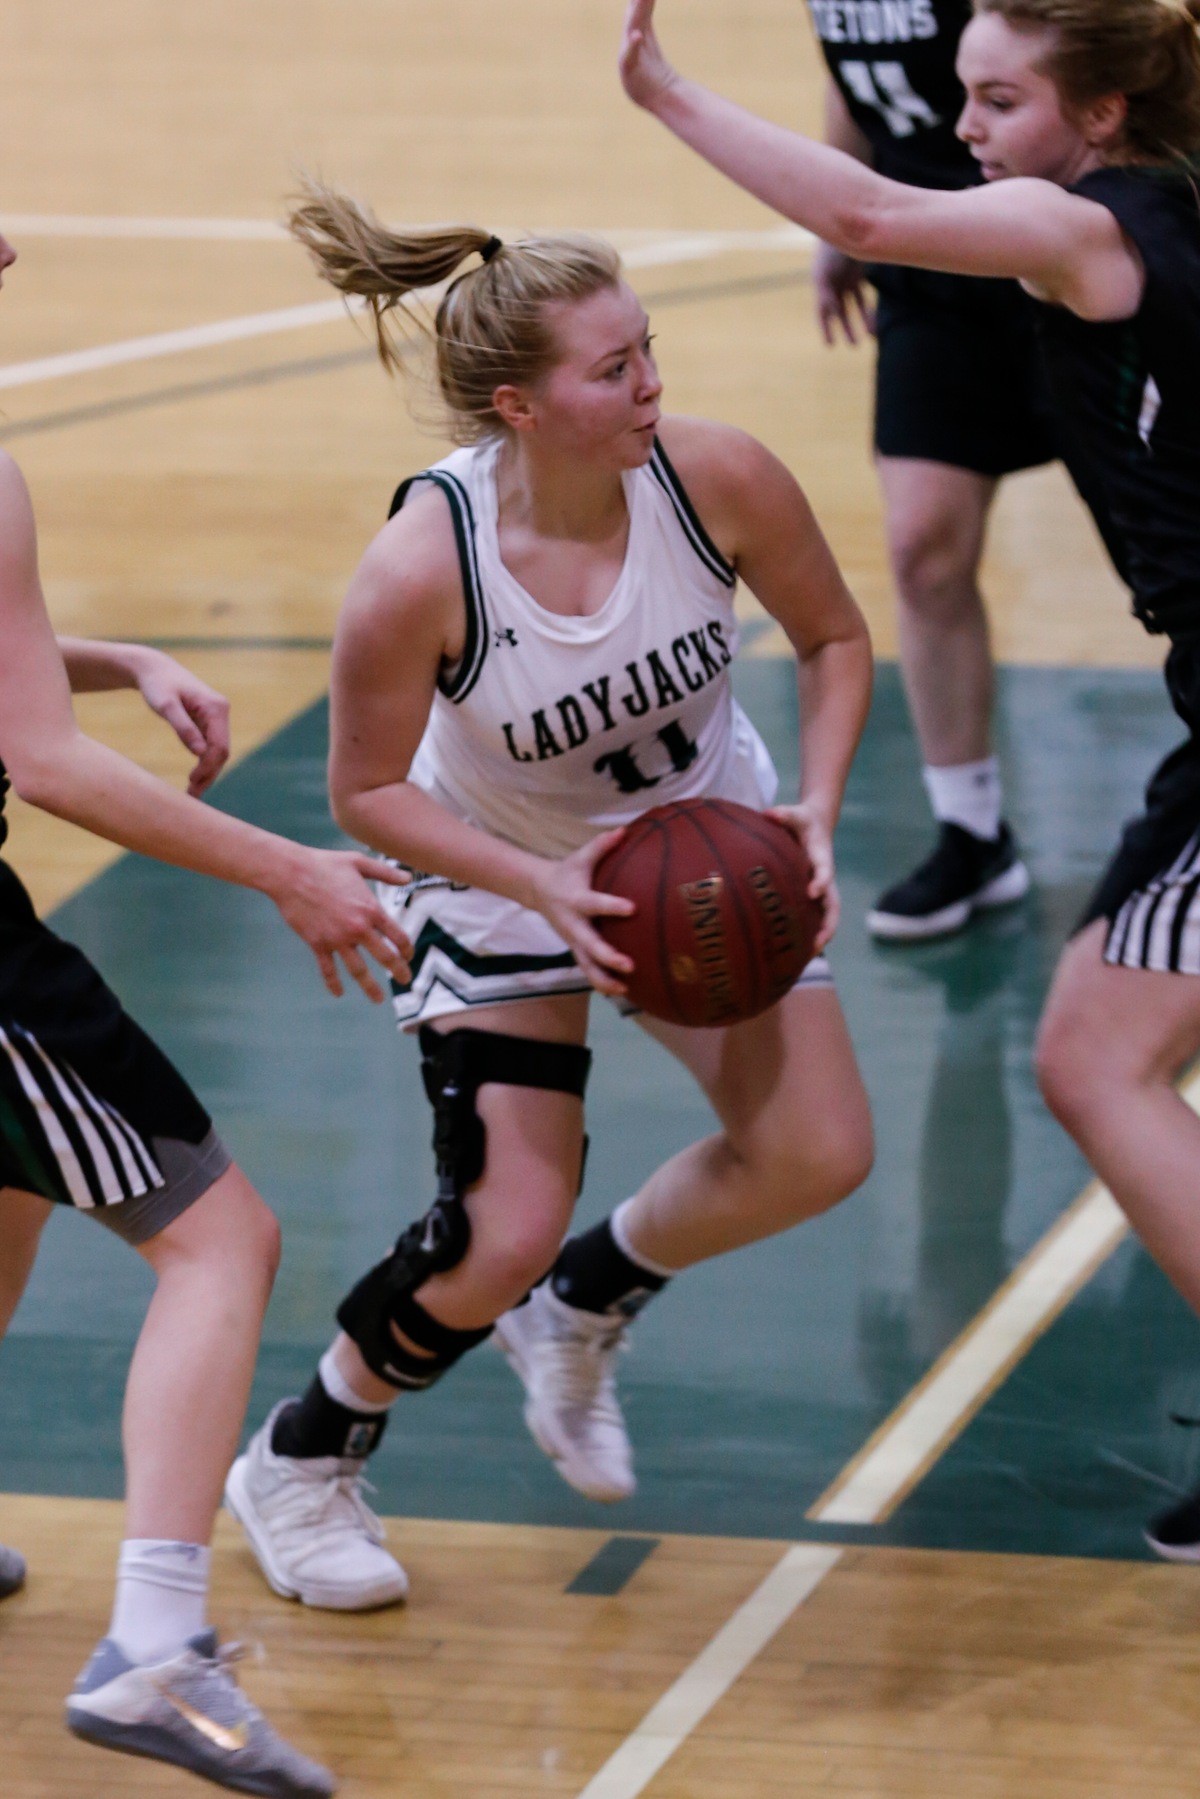 Sophomore Victoria Obergfell dropped in 23 points to lead DCB to a 55-54 victory over Williston State College on Thursday night in Williston.